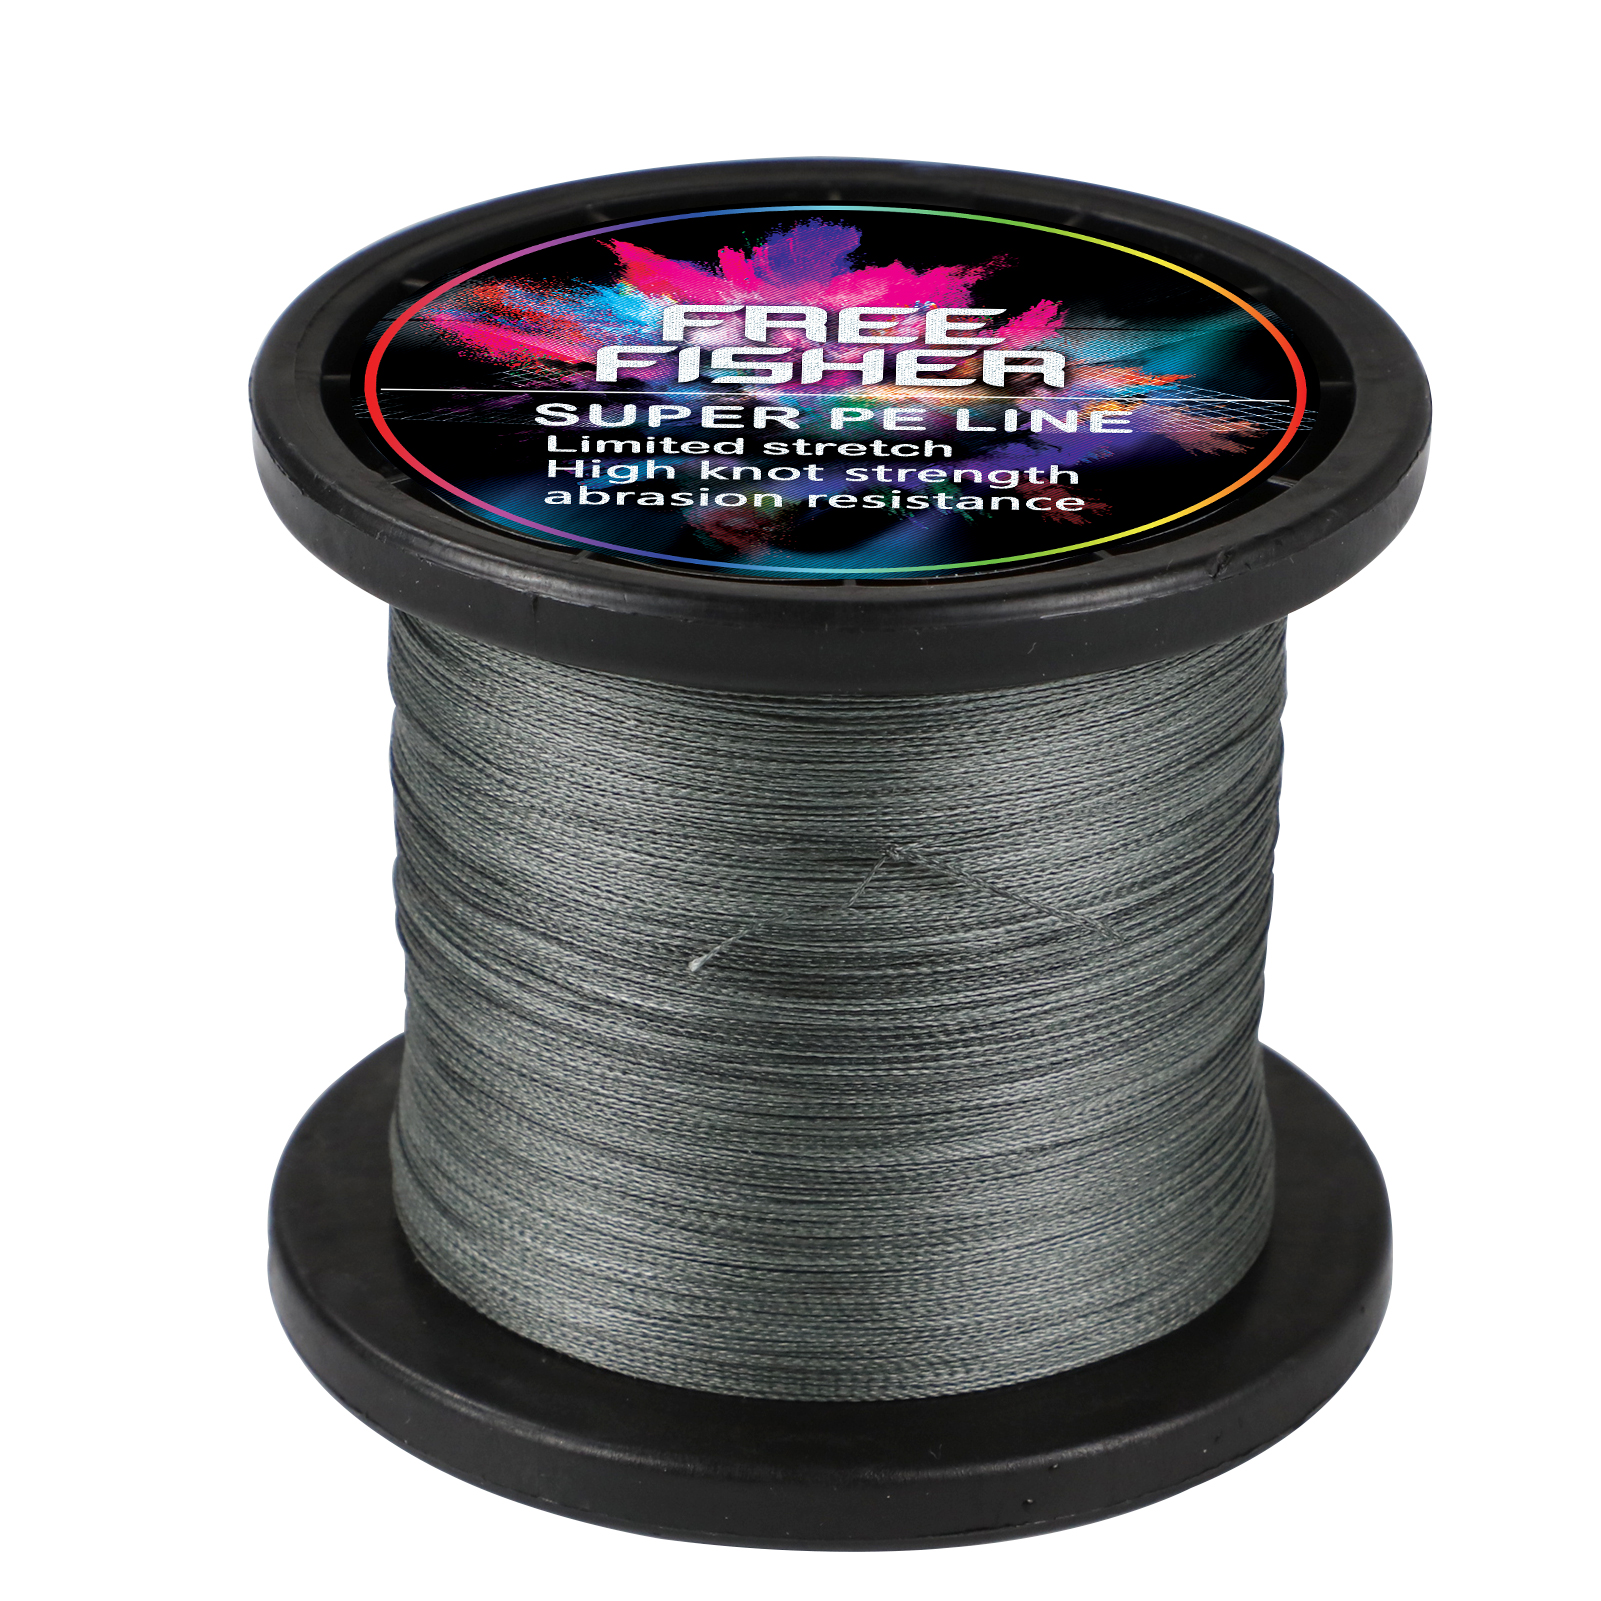 FREE FISHER Fishing Braided Line 1000m 4 Strands Multifilament 100% PE Wire 10LB-100LB 0.1-0.55MM for Saltwater/Freshwater